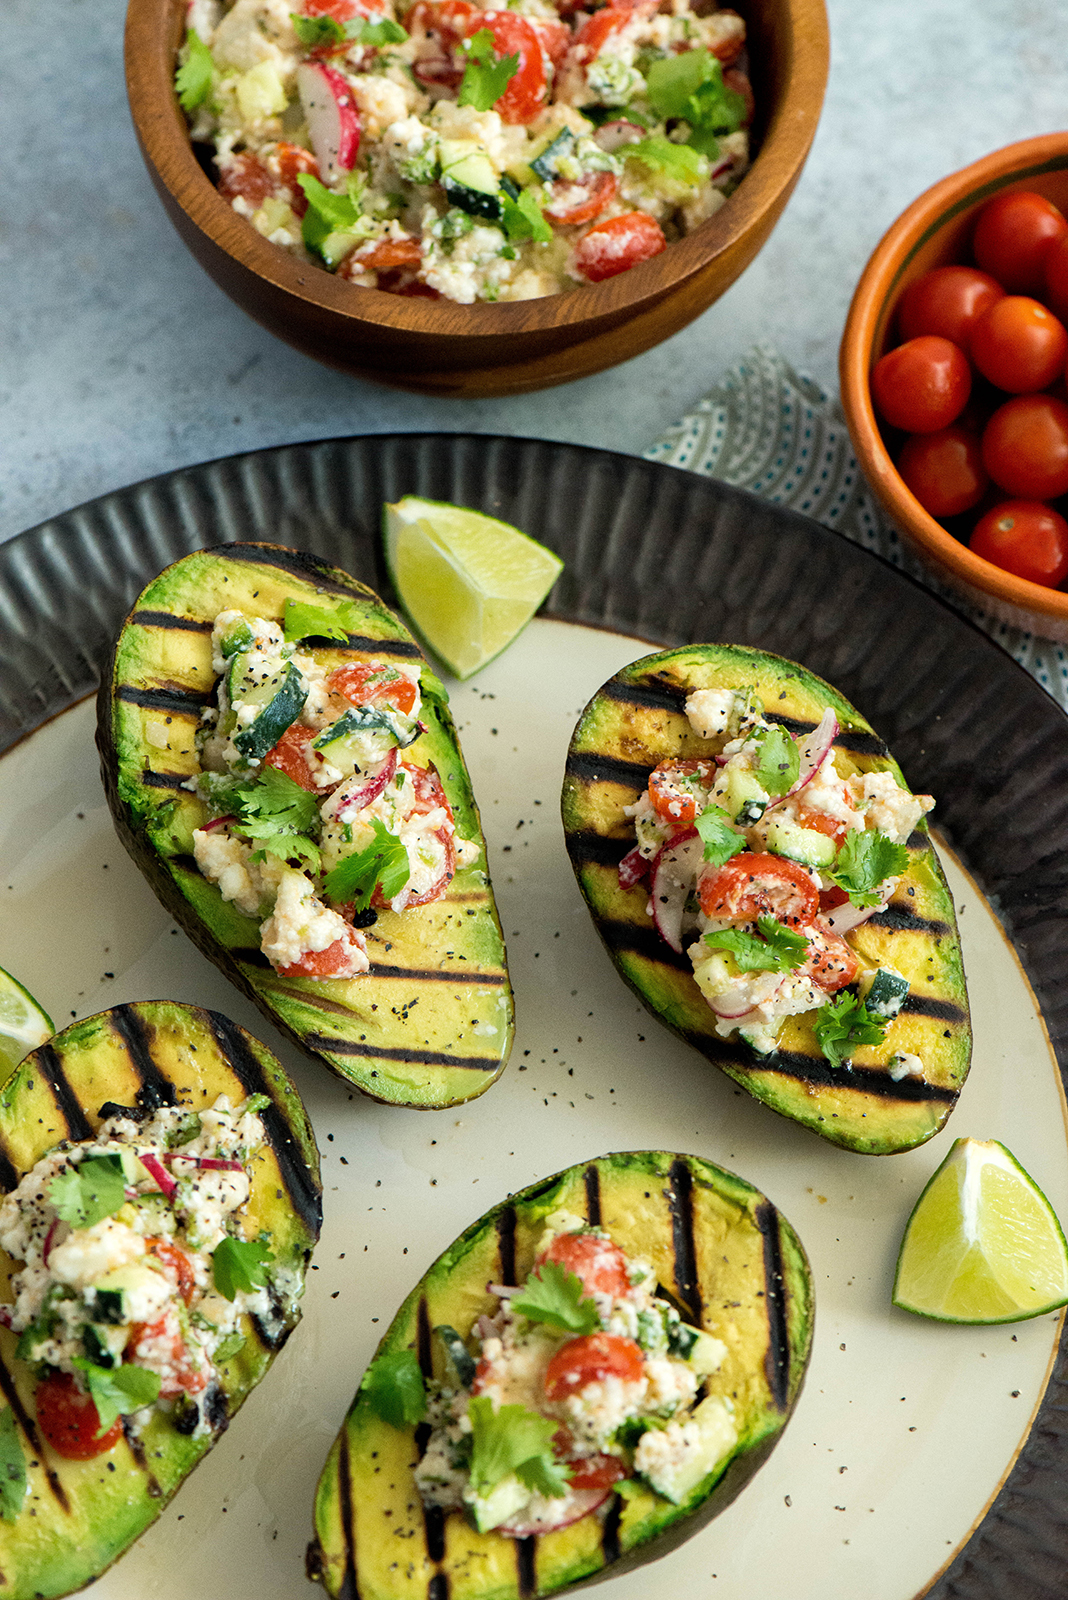 Grilled Avocados with Queso Fresco Salad - Nibbles and Feasts